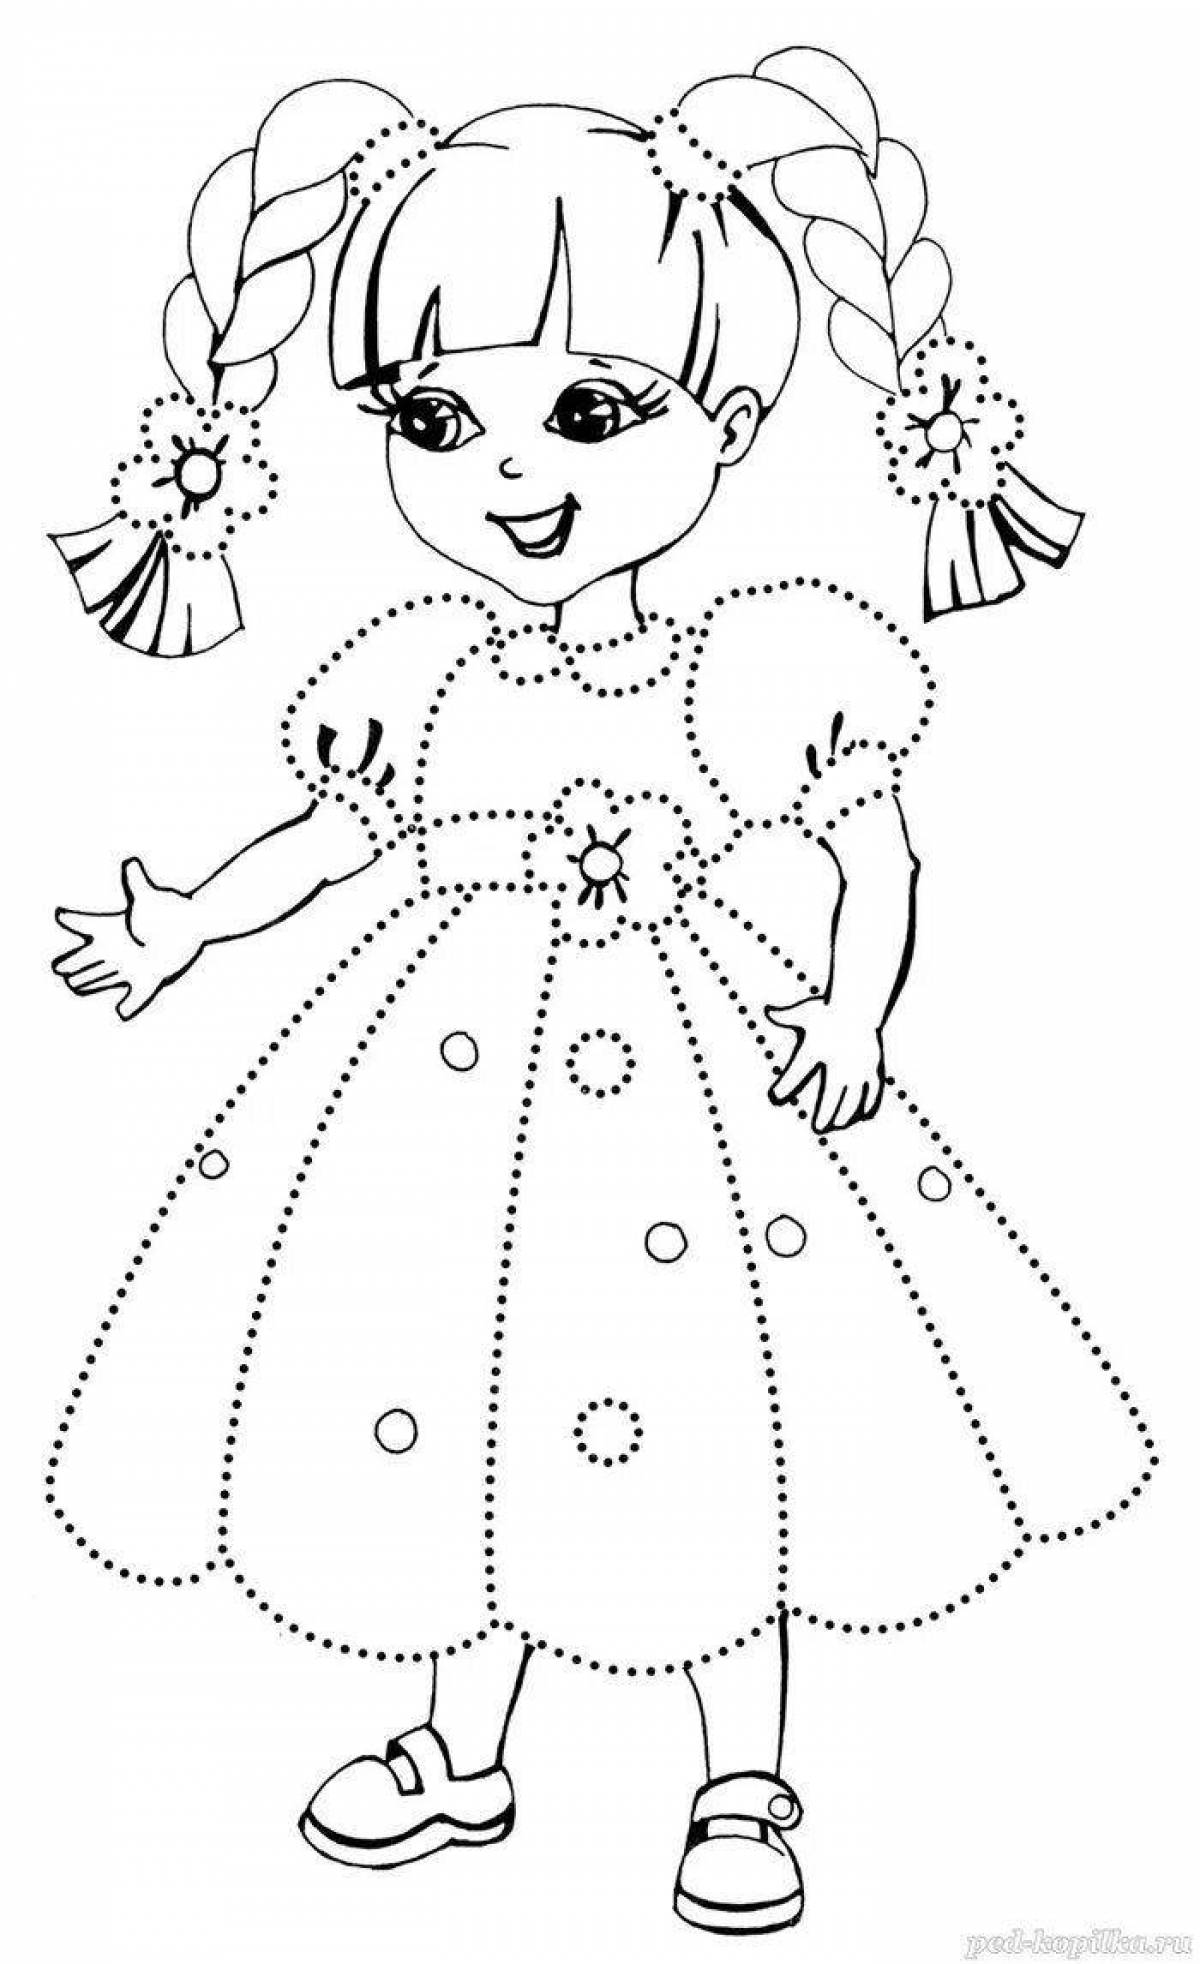 Violent doll coloring page